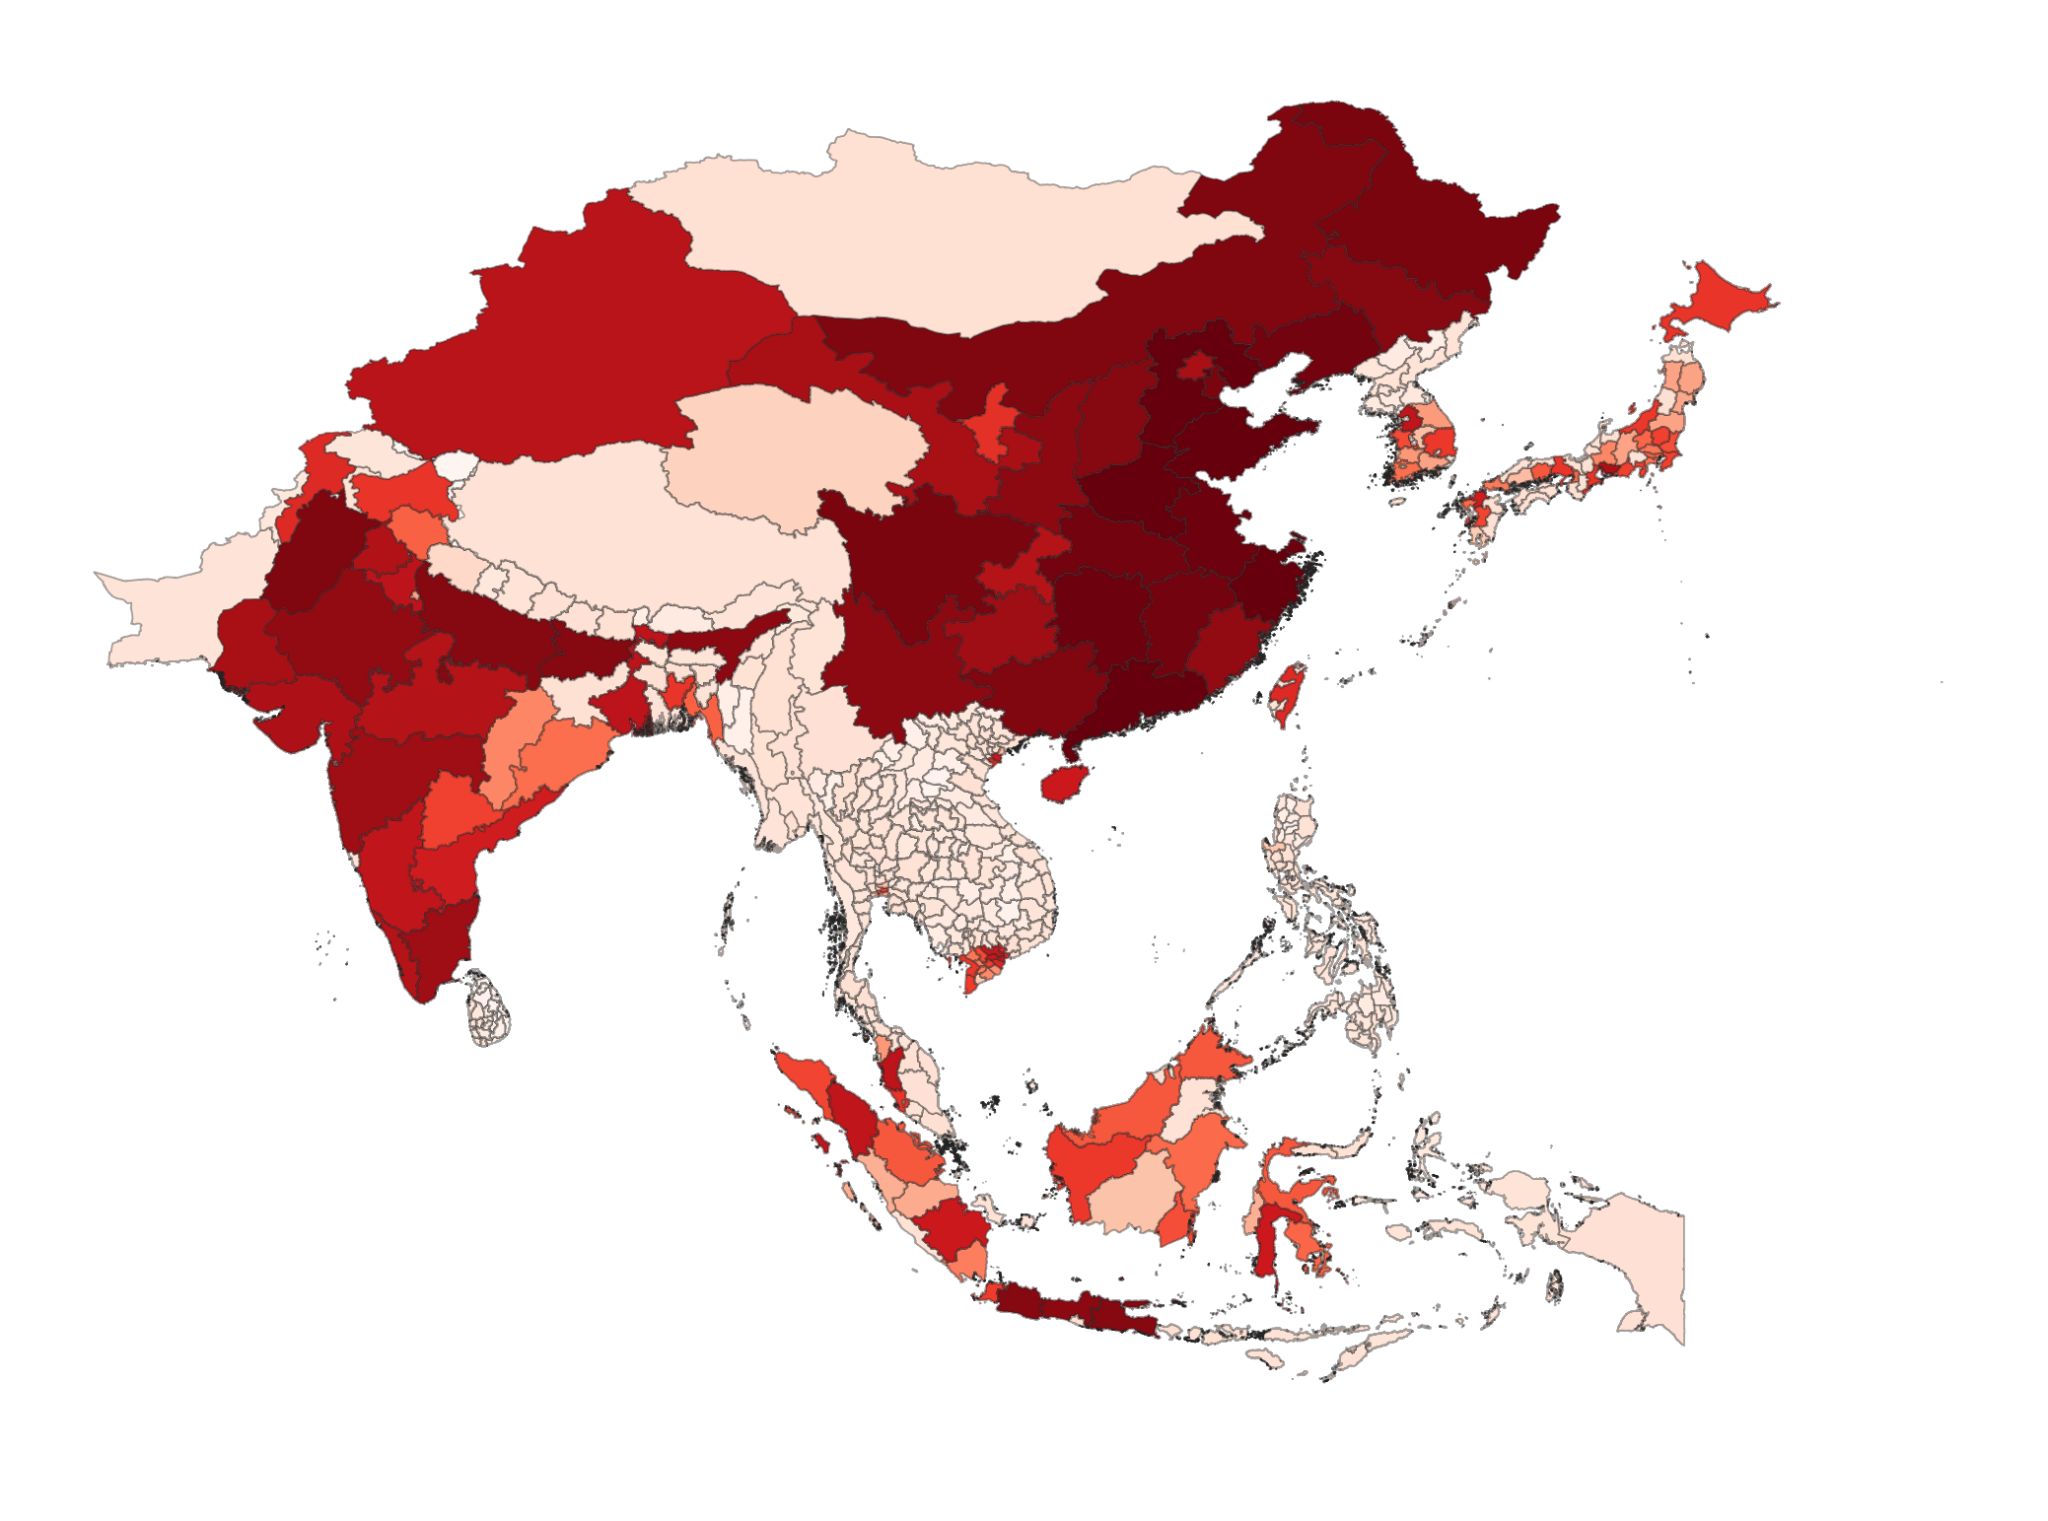 Climate risk in Asia as an Aggregated Damage Ratio, projected to the year 2050. Asia dominates the list of provinces at risk by Aggregated Damage Ratio, with more than half (114) of the top 200 in 2050 in this region. More than a quarter (54) of these are in East Asia: 29 in China, 20 in Japan and 4 in South Korea. 36 of the top 200 are in Southeast Asia, notably Vietnam and Indonesia. South Asia has 24 of the top 200. After China, India has the highest number of states in the top 50 (9), with Punjab, Bihar, Uttar Pradesh and Assam ranking highest. Pakistan also has multiple provinces in the top 100, including Sindh province. Devastating flooding between June and August 2022 affected 30 per cent of the area of Pakistan and has partially or fully damaged more than 900,000 houses in Sindh province. East Asia and Southeast Asia see the greatest increase in Average Damage between 1990 and 2050, and China in particular has many provinces with the greatest overall Aggregated Damage Ratio. This increase and overall risk to the built environment in 2050 is driven predominately by sea level rise and secondarily by flooding risk” in the Asia section should read “by flooding and coastal inundation. The analysis highlights the vulnerability of major cities in East Asia and Southeast Asia including Jakarta, Beijing, Hồ Chí Minh City, and Taiwan. Graphic: XDI